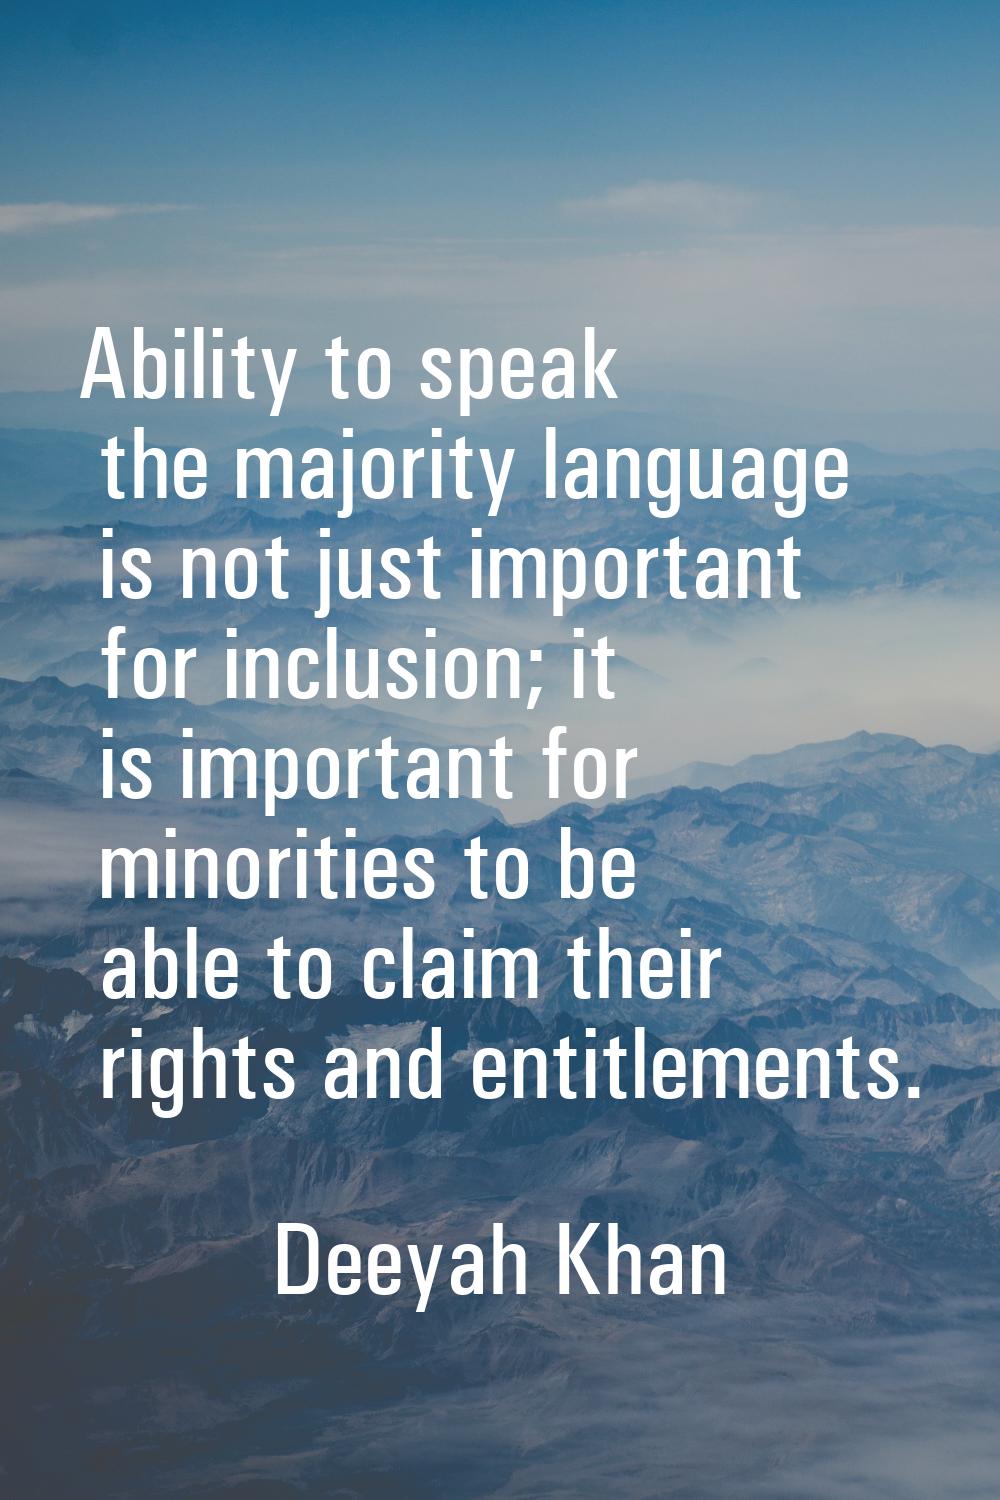 Ability to speak the majority language is not just important for inclusion; it is important for min